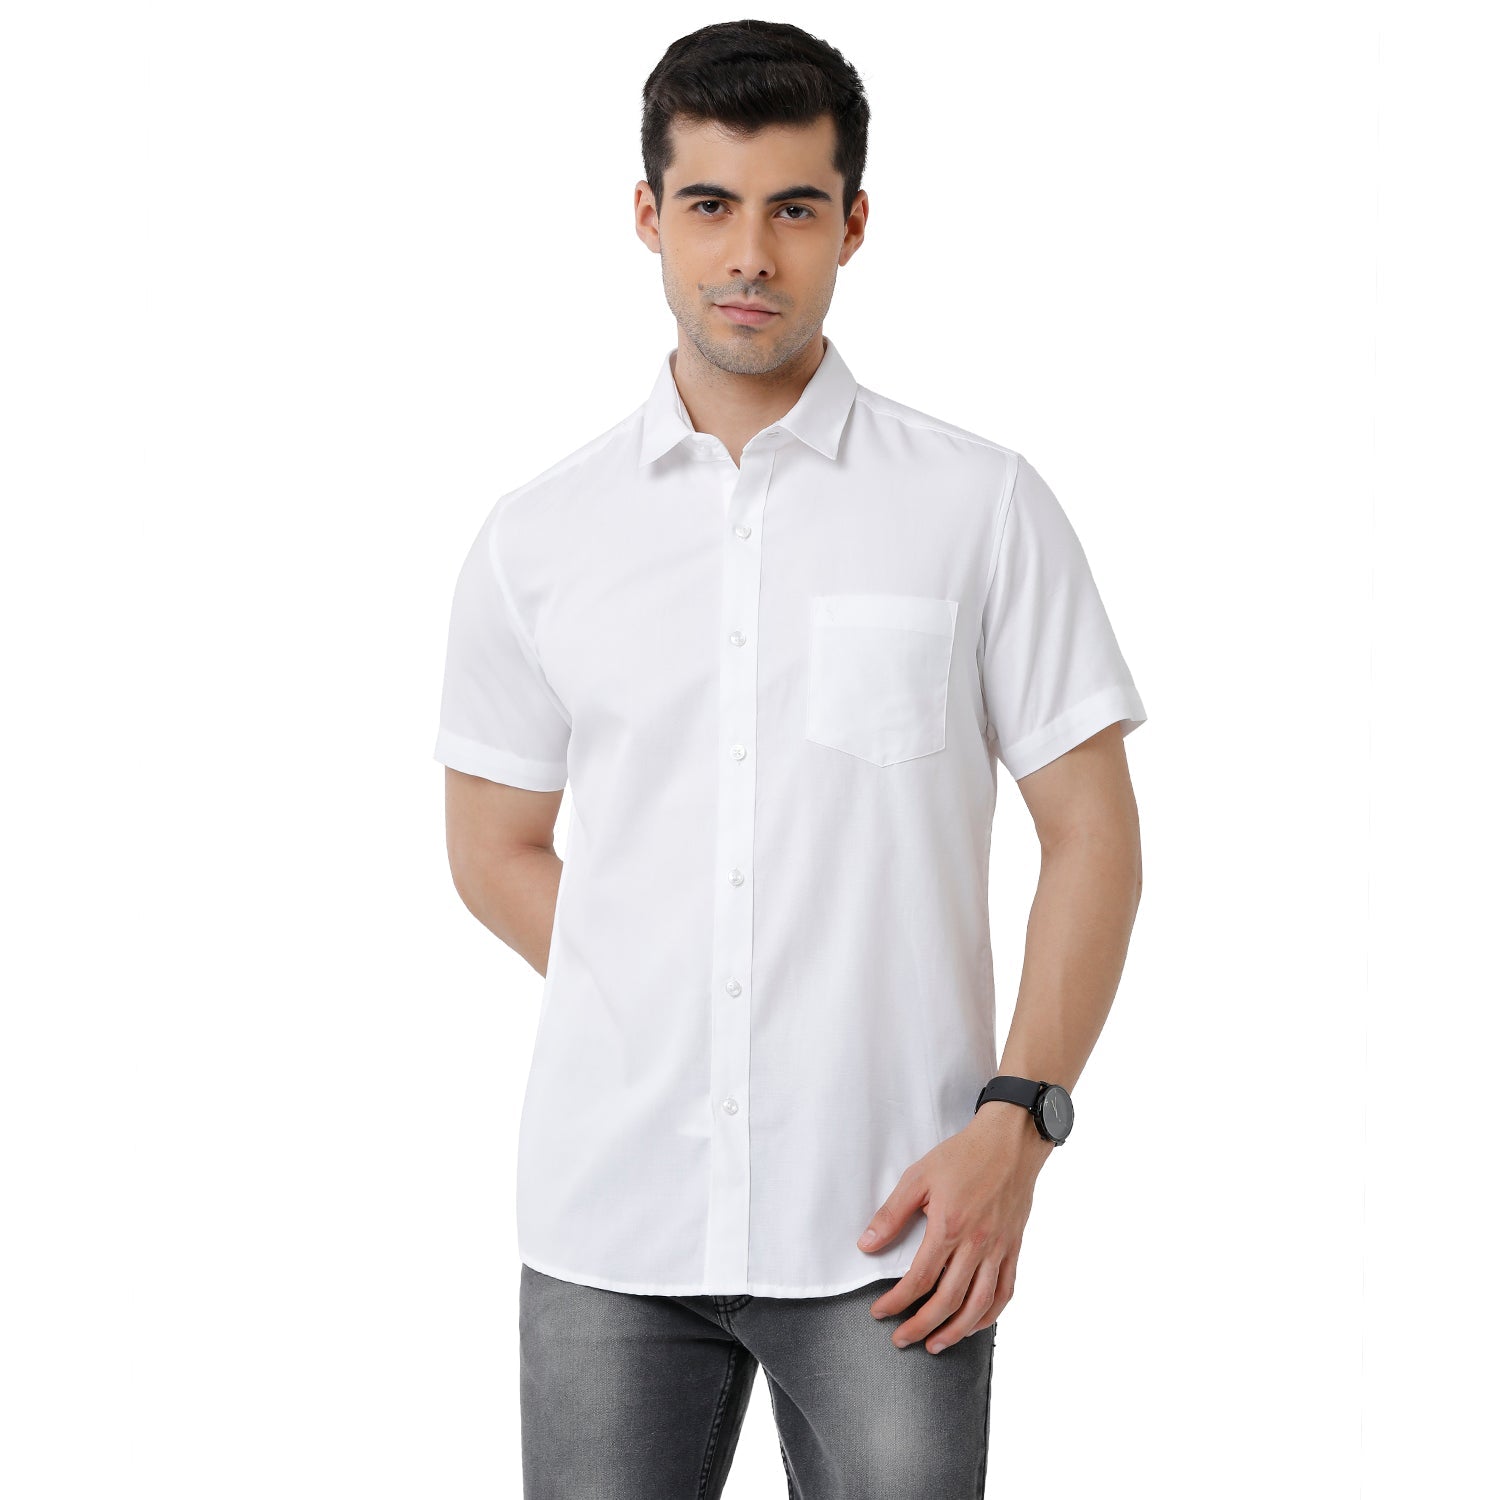 Classic Polo Mens 100% Cotton Solid Slim Fit Half Sleeve White Color Shirt - White 02 Hs Shirts Classic Polo 